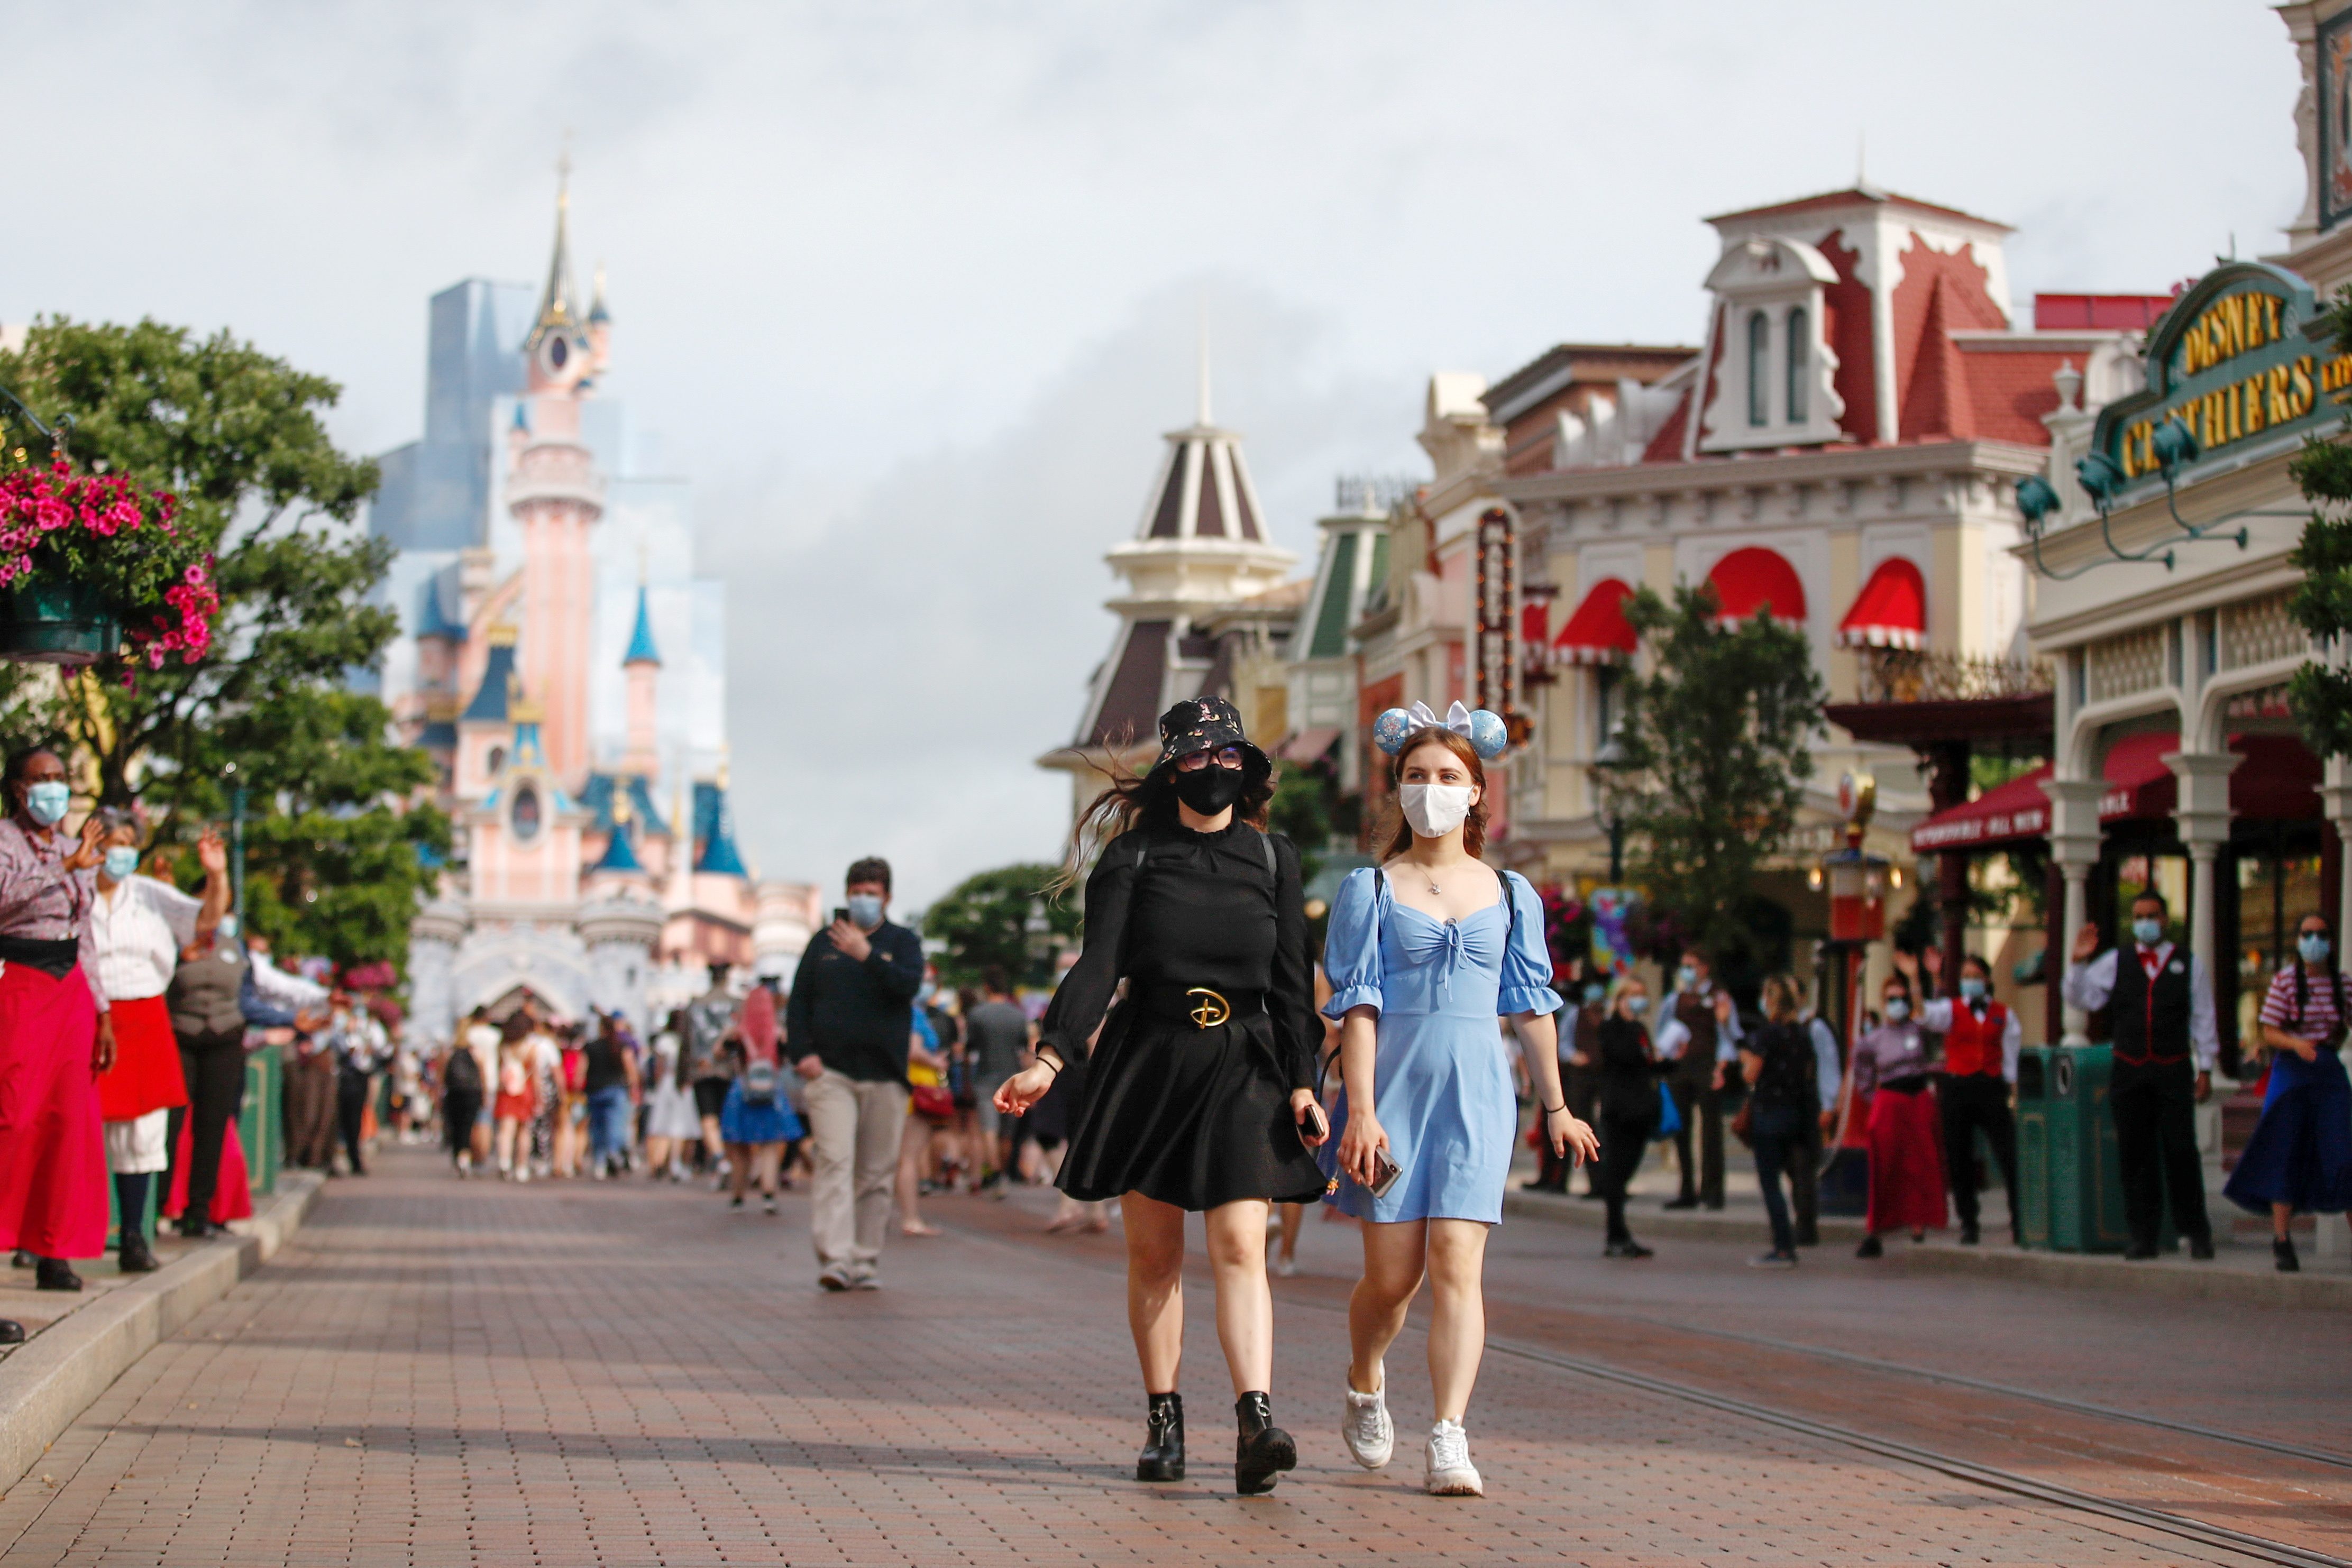 Disneyland Paris reopens, but Mickey Mouse won’t give hugs